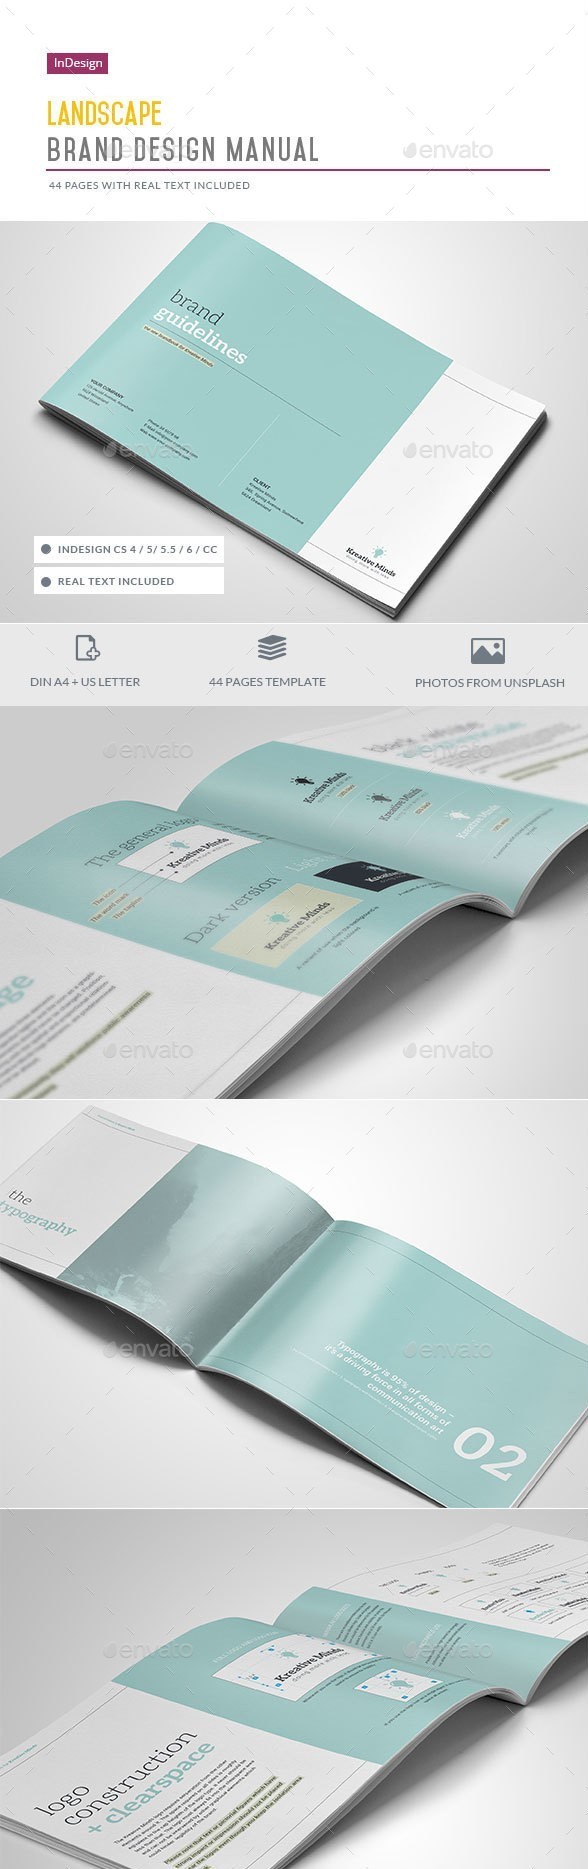 Brand Guidelines - 44 Pages